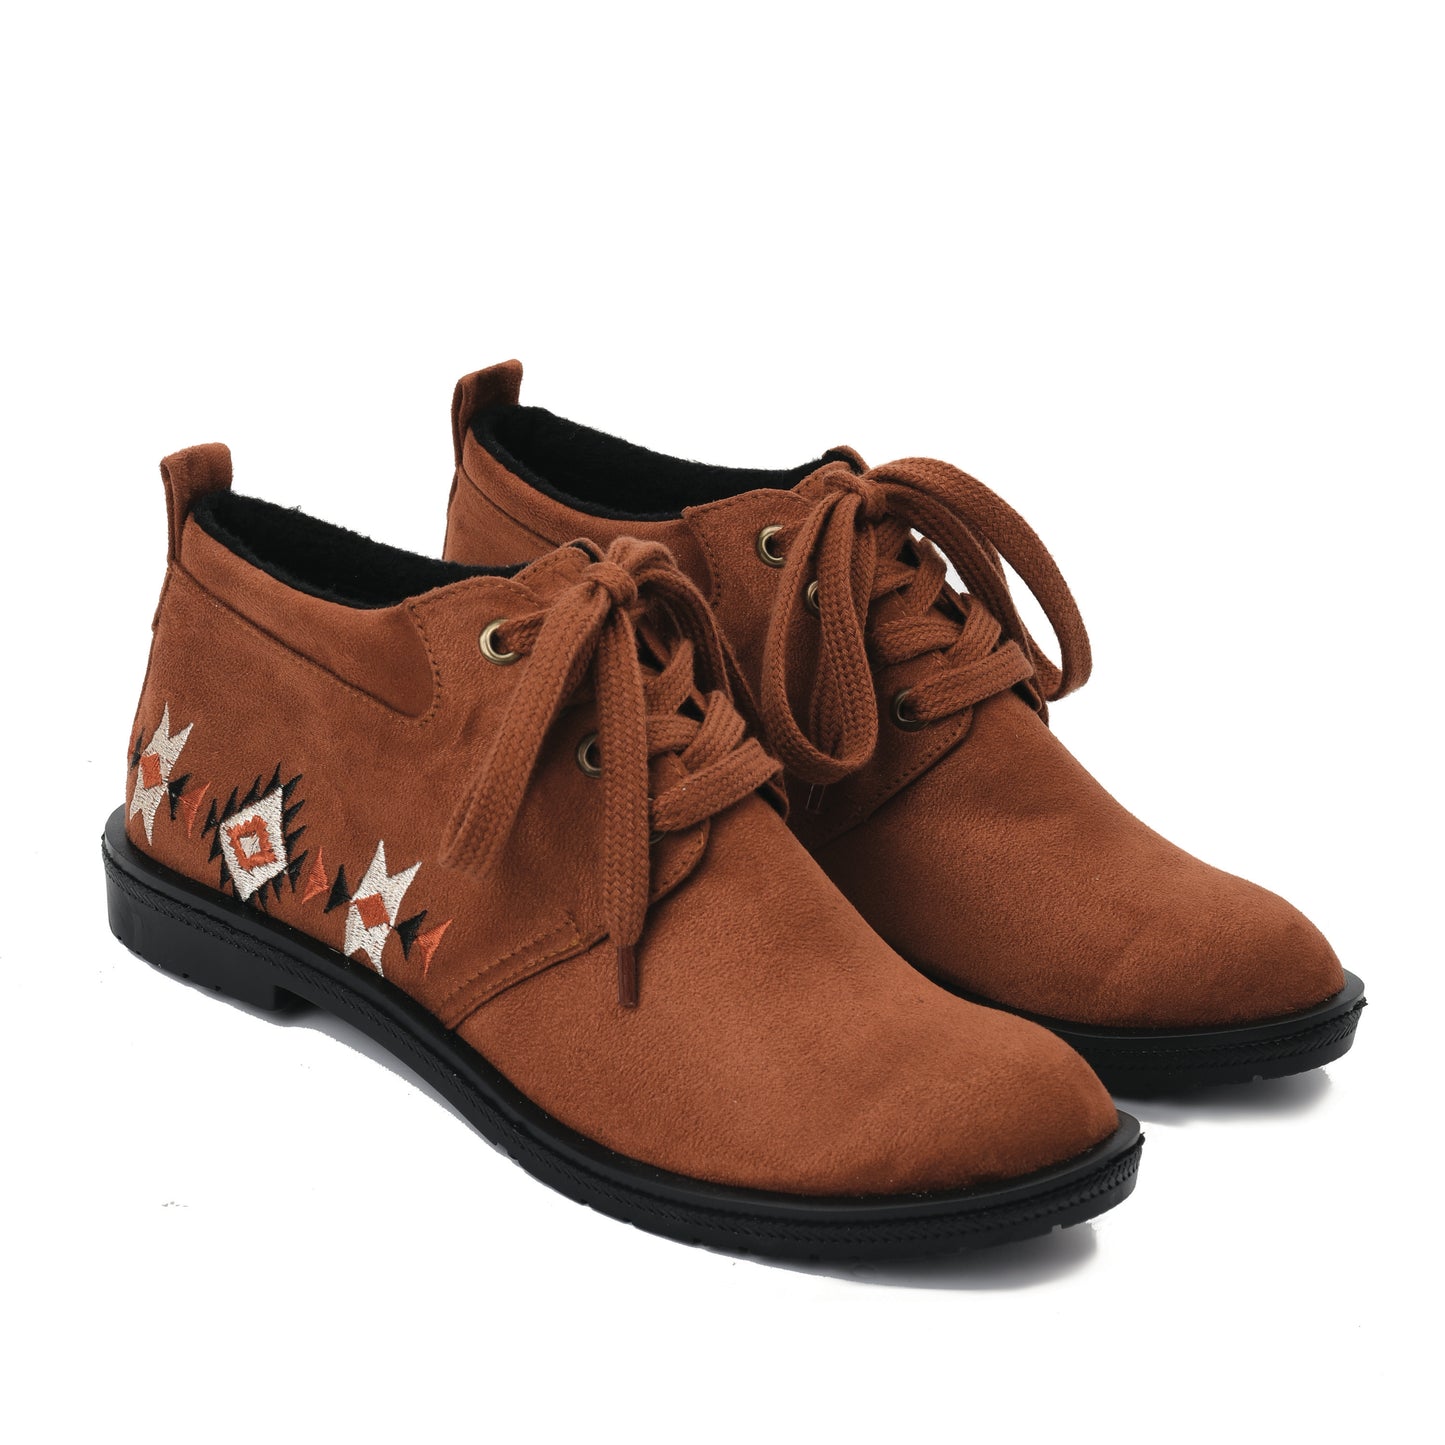 Havana camel embroidered low neck boots